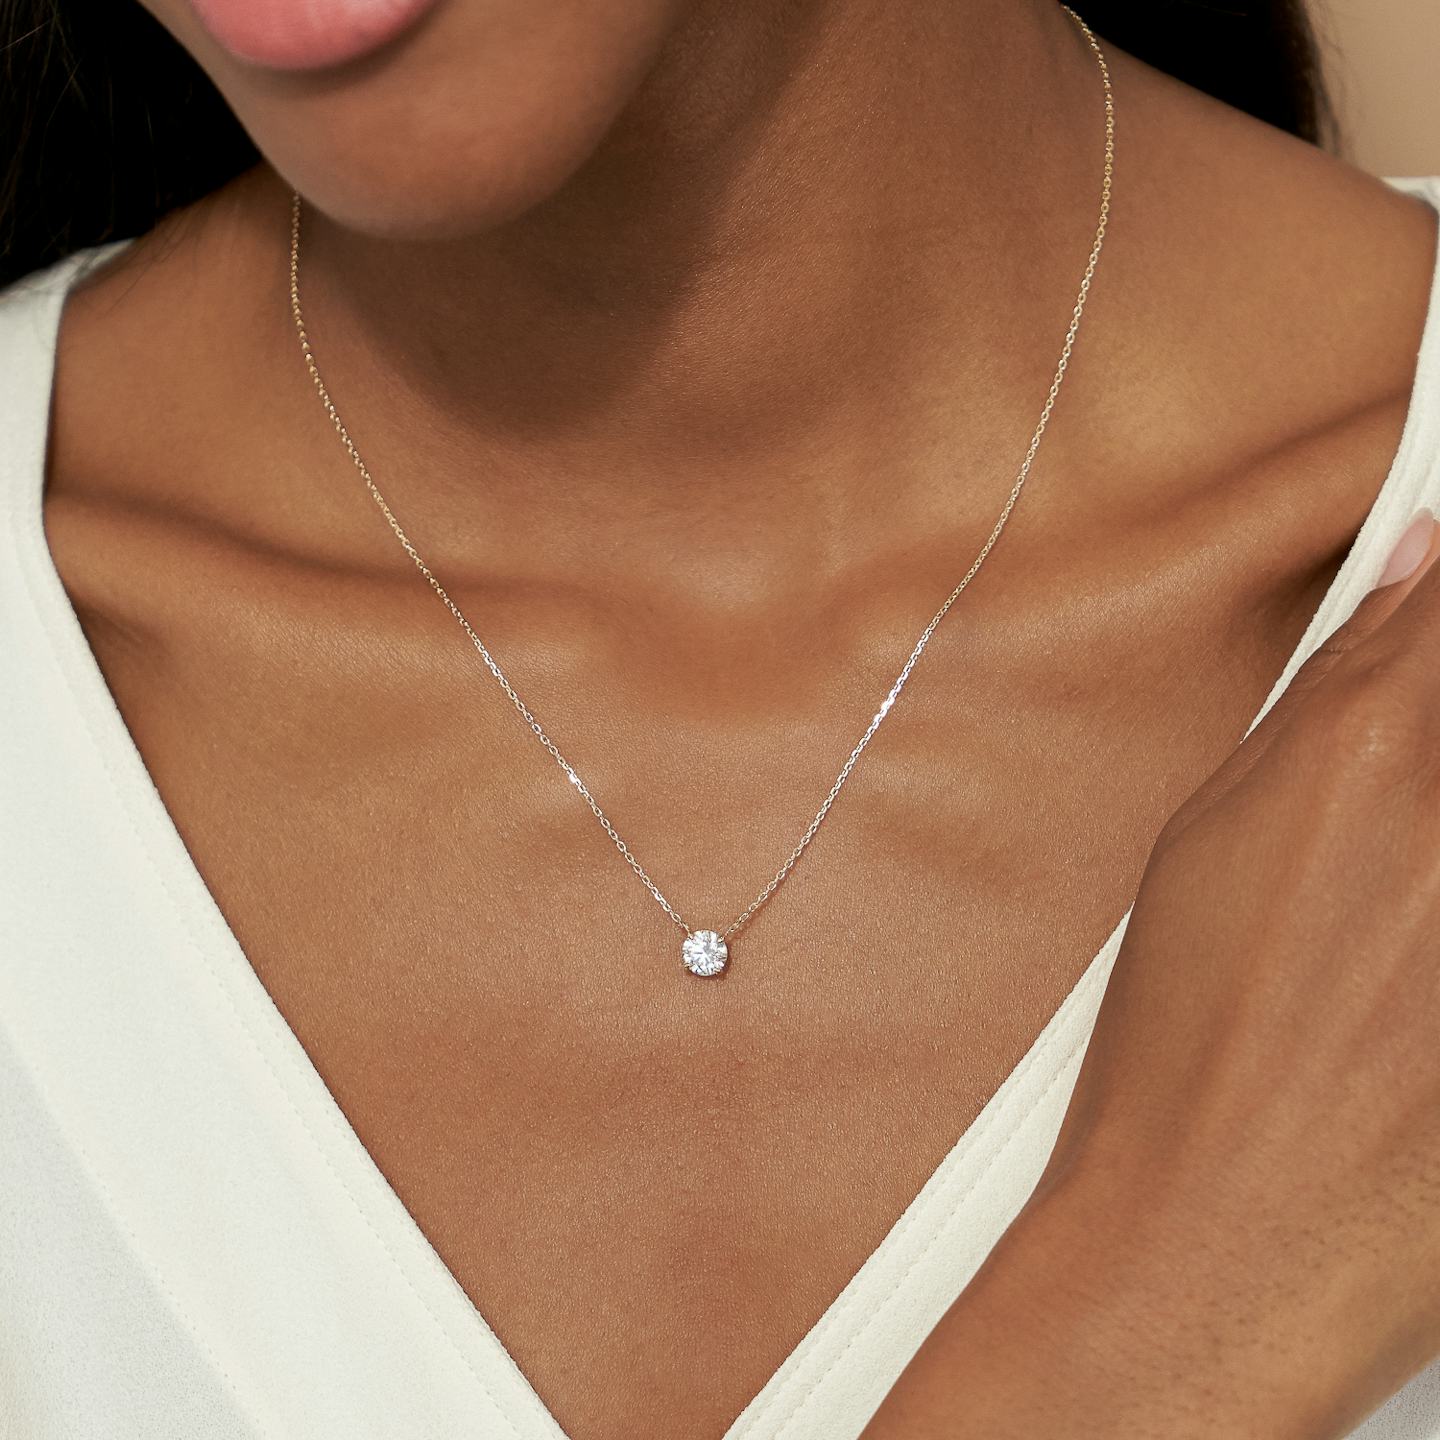 VRAI Solitaire Necklace | Round Brilliant | 14k | 18k Yellow Gold | Carat weight: 1